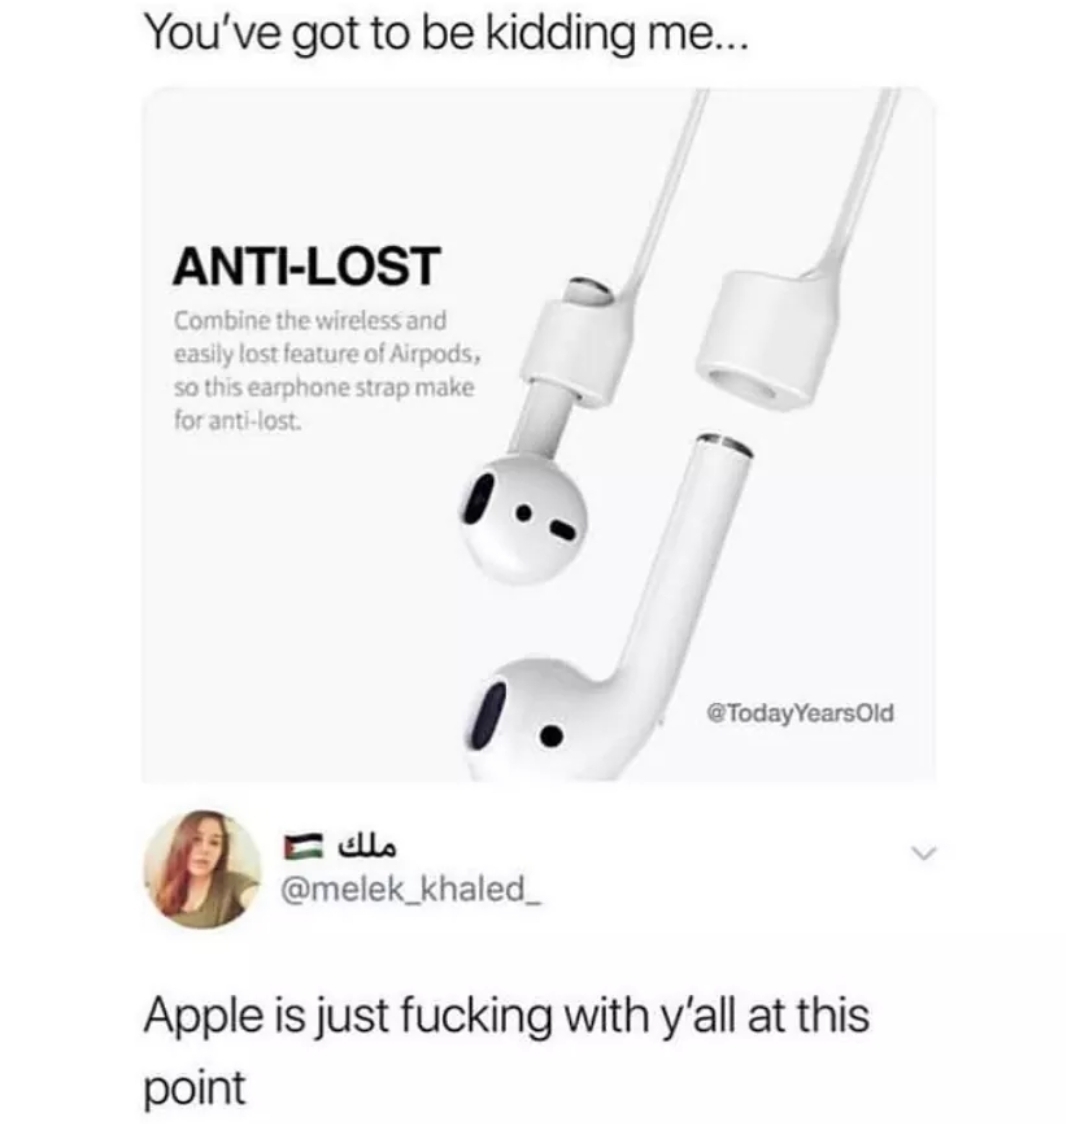 Apple just fucking with yall - meme